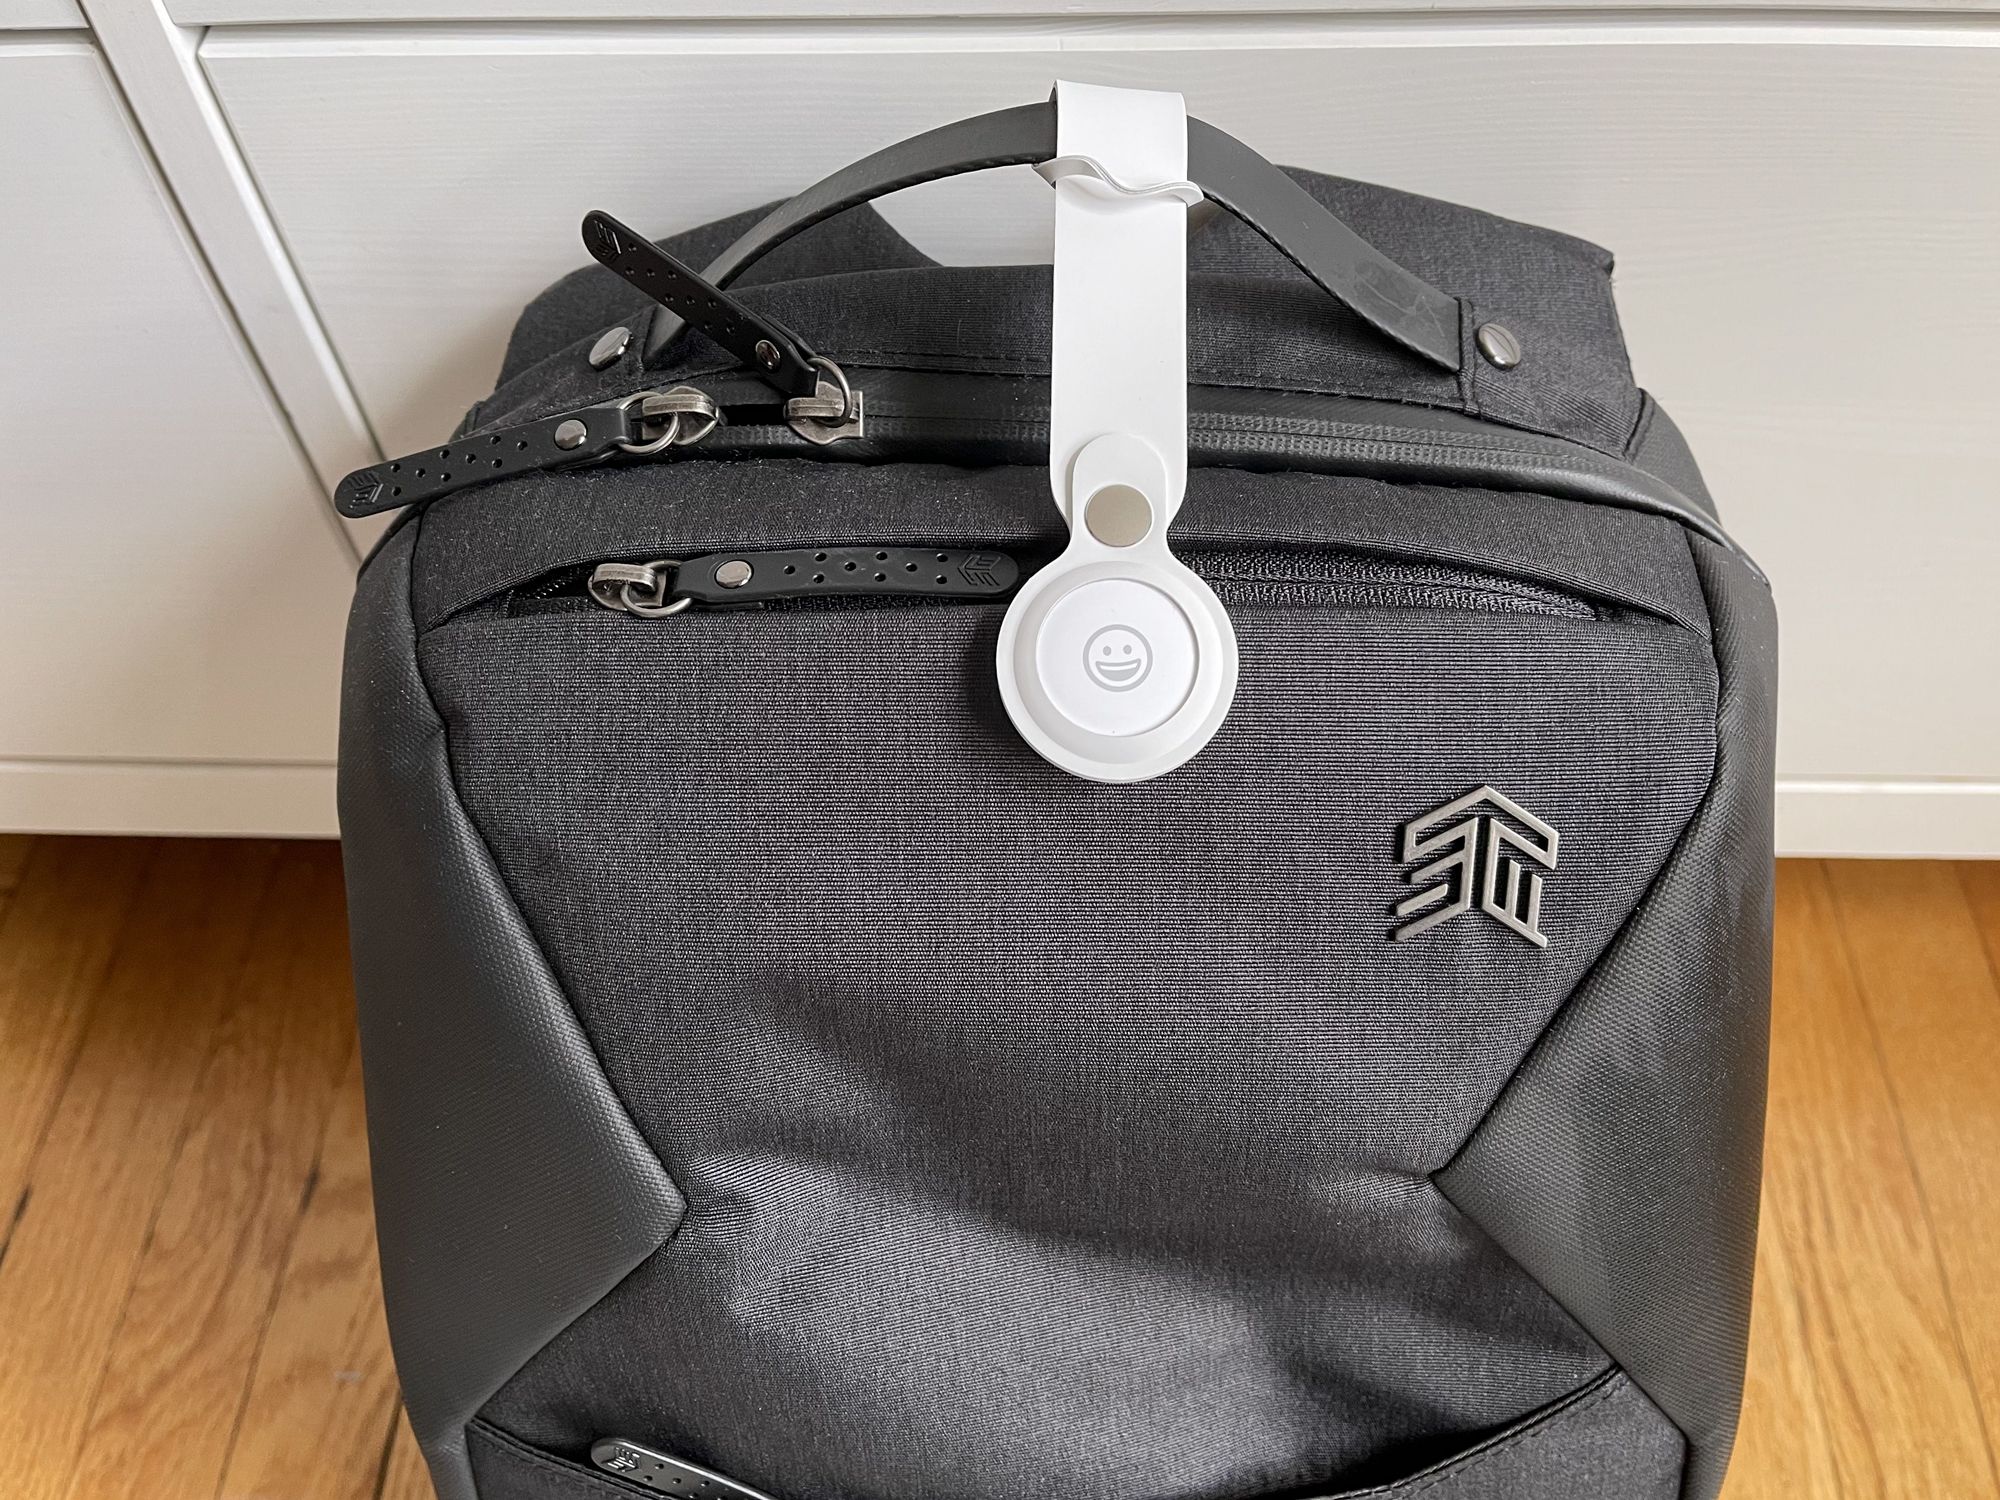 Find your keys, backpack, and more with AirTag and Find My - Apple Support